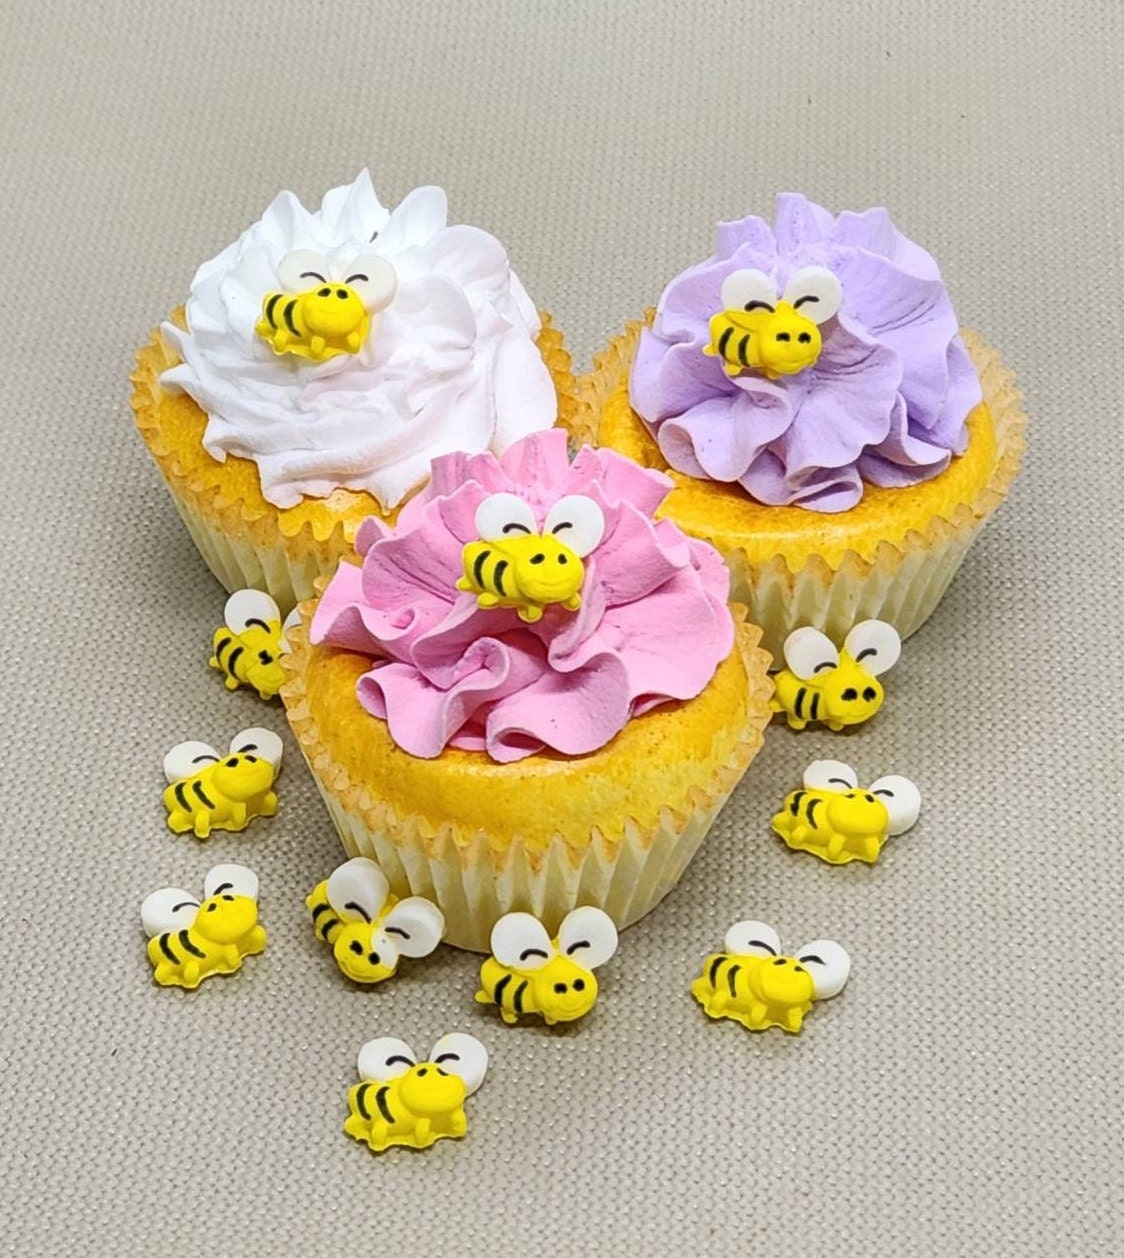 Set of 12 - Yellow and Black BUMBLE BEE Cupcake Toppers - Baby  Shower/Birthday Party - Decorations/Favors/Centerpiece - Boy/Girl